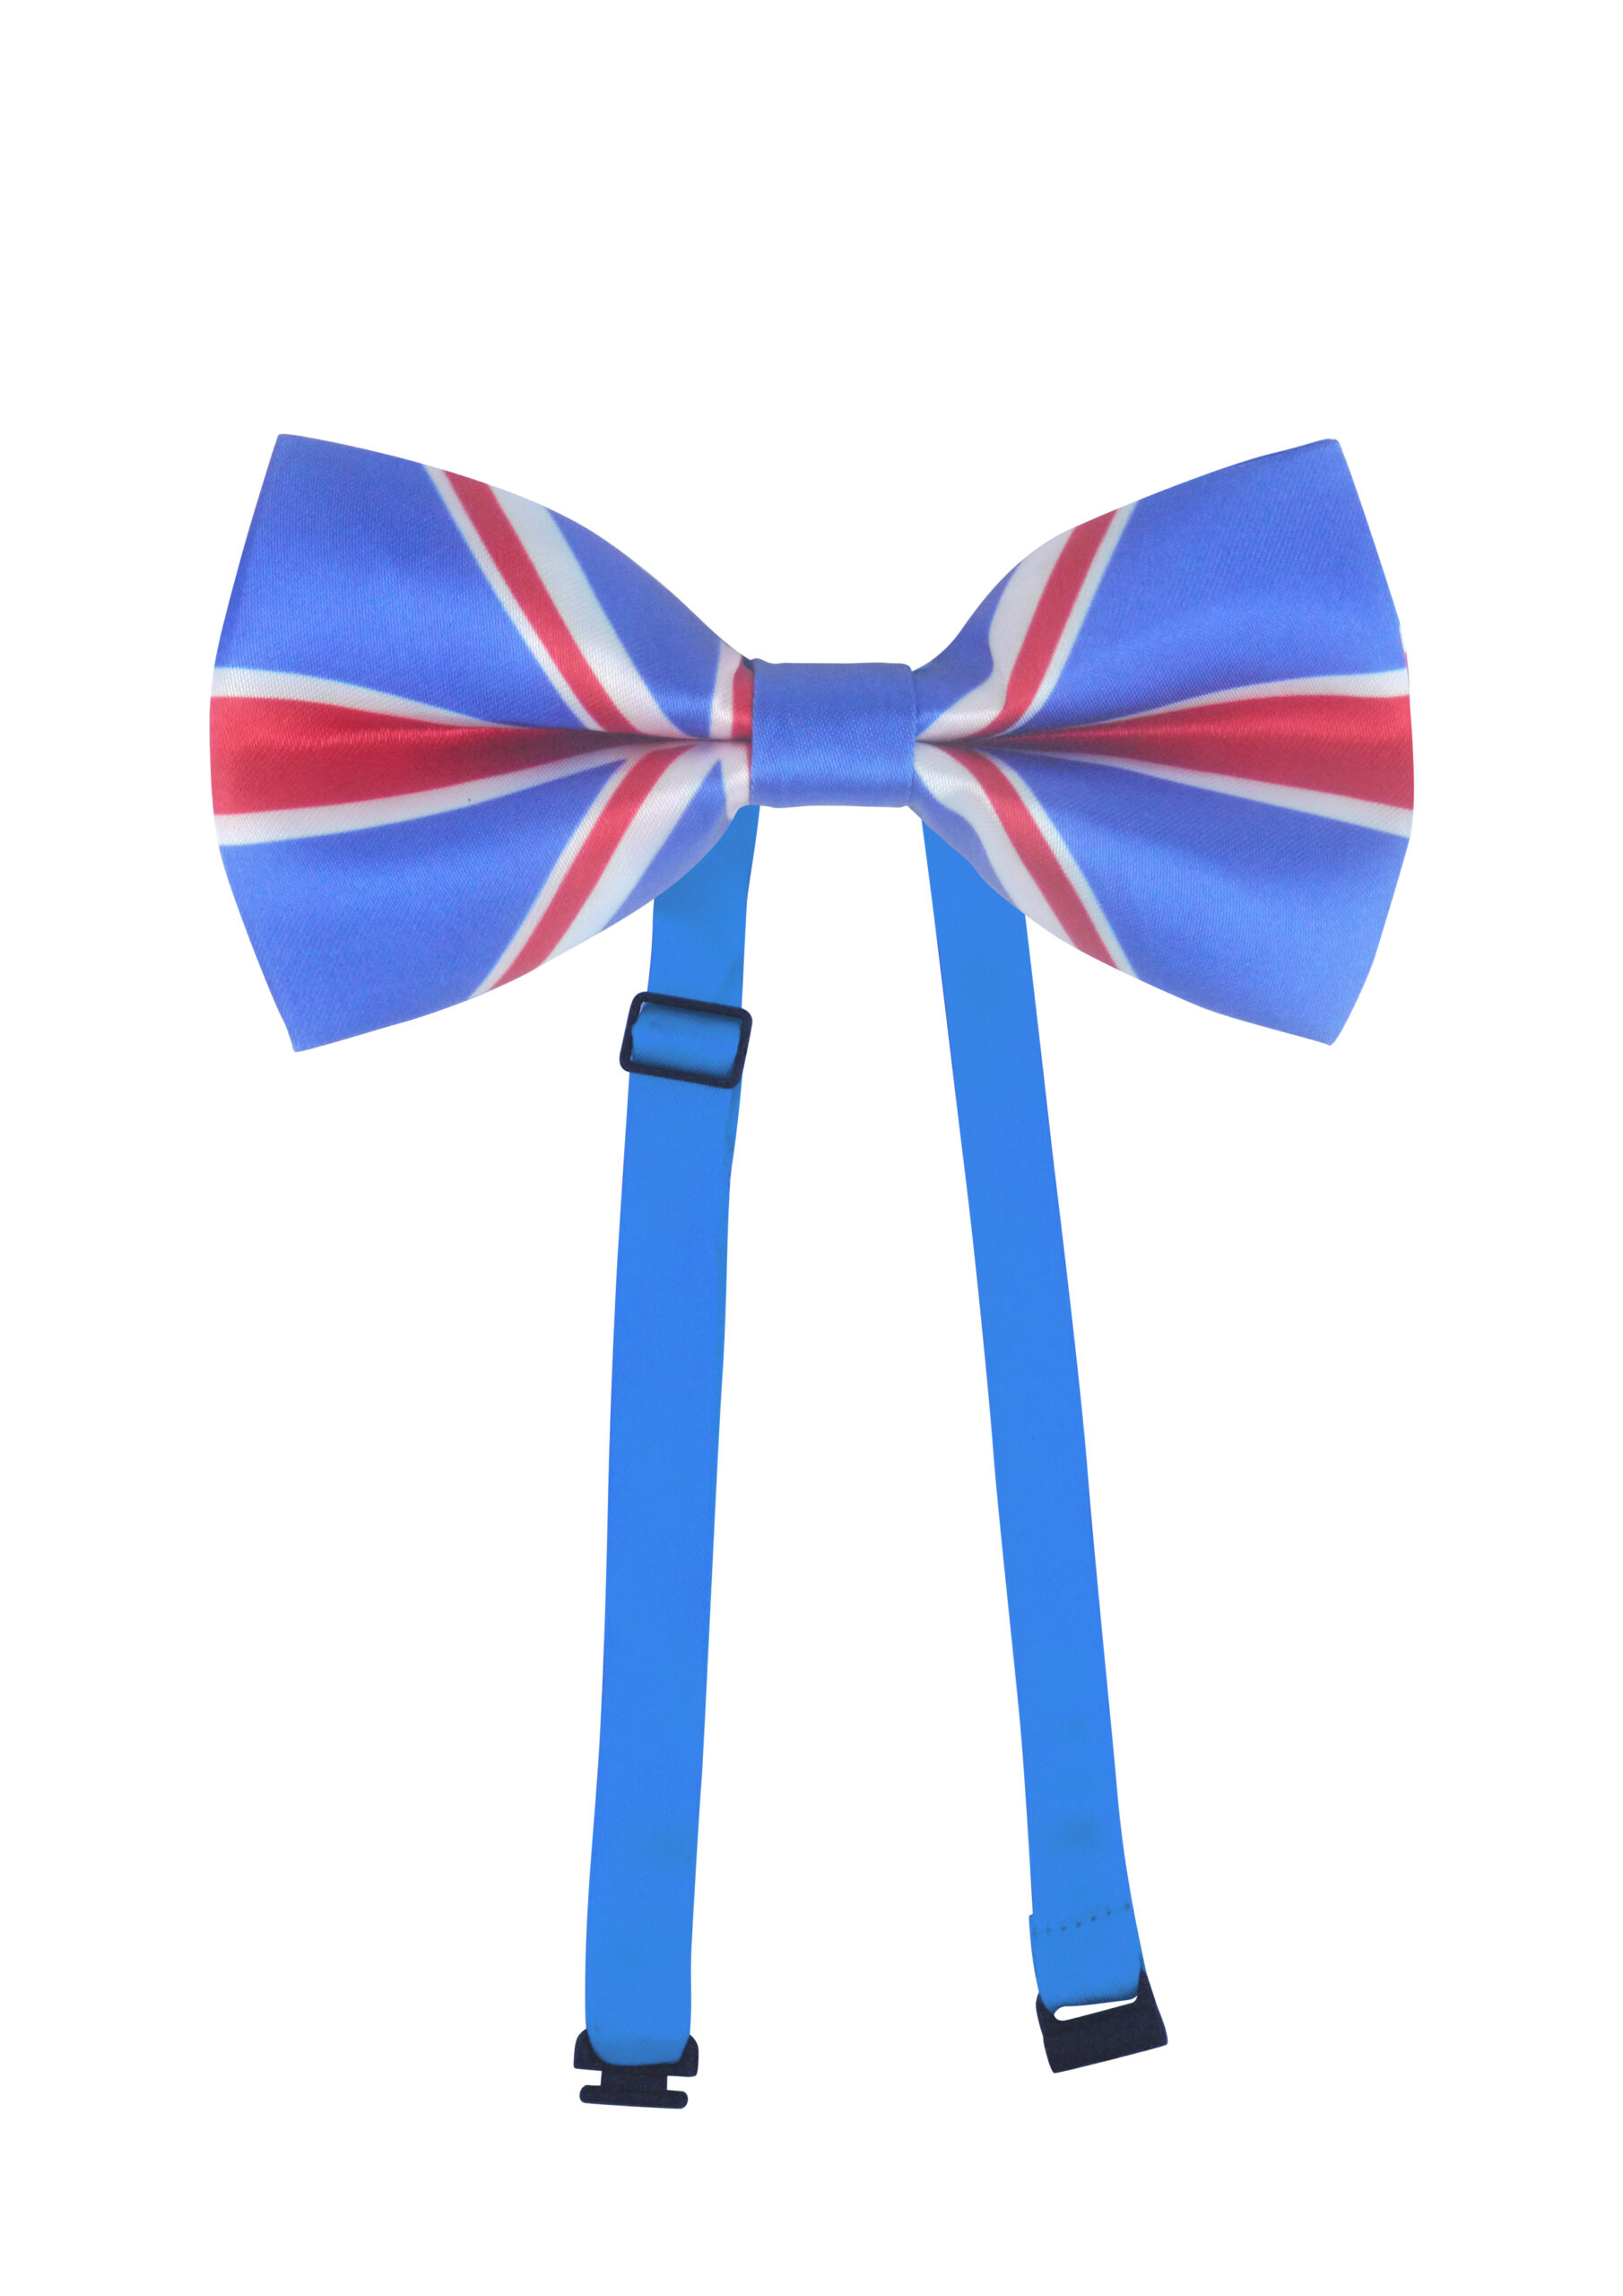 Union Jack Bow Tie Pre-Tied Flag Cloth with Adjustable Strap